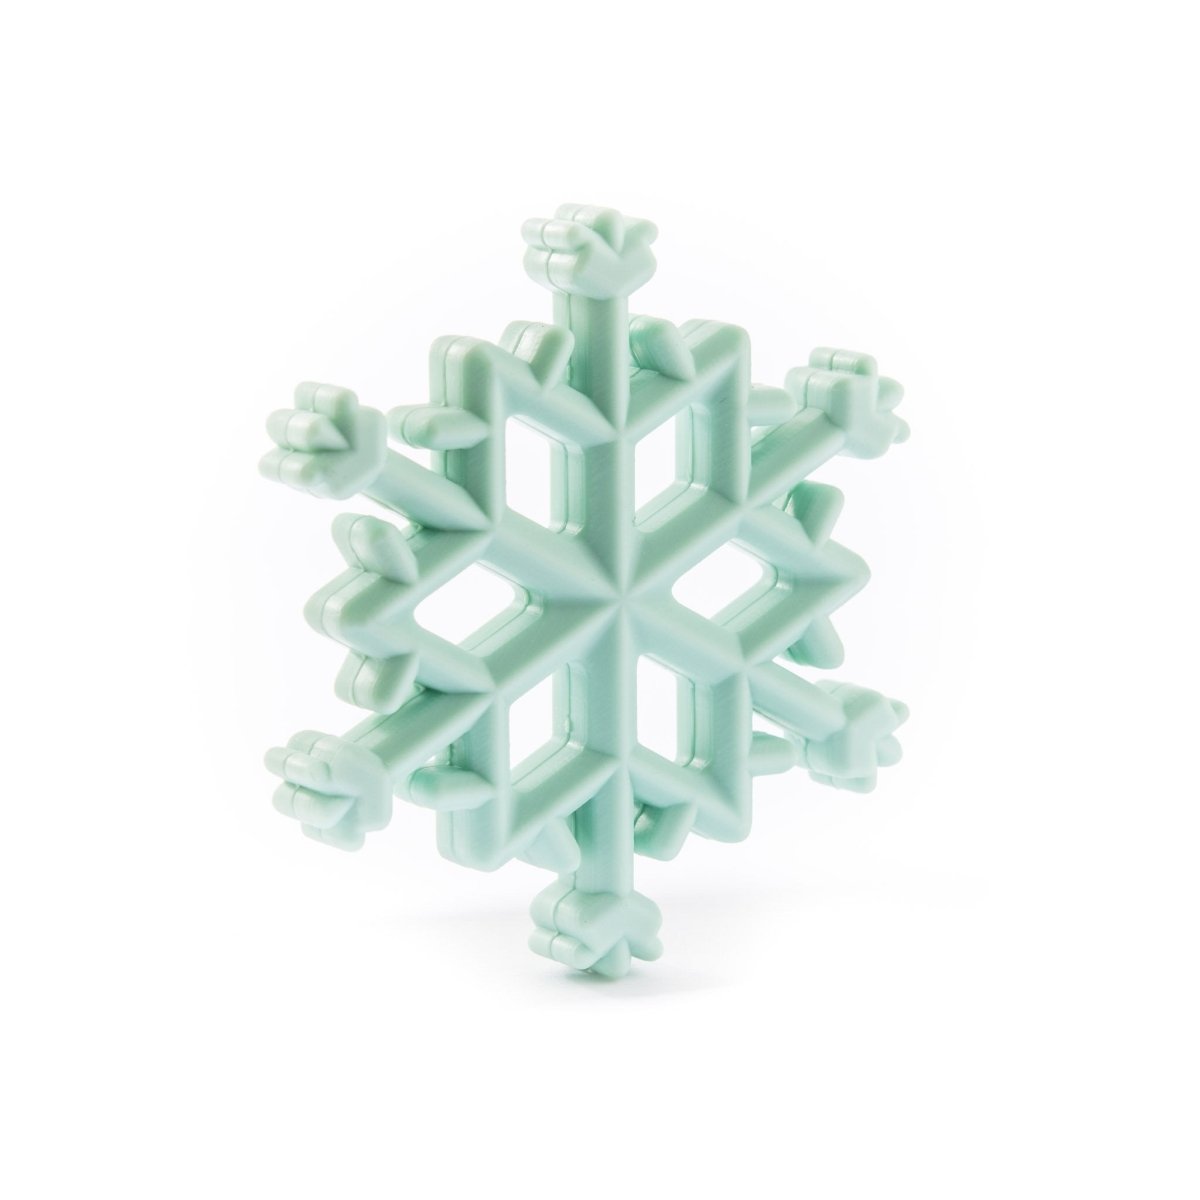 Silicone Teethers and Pendants Snowflakes Mint from Cara & Co Craft Supply